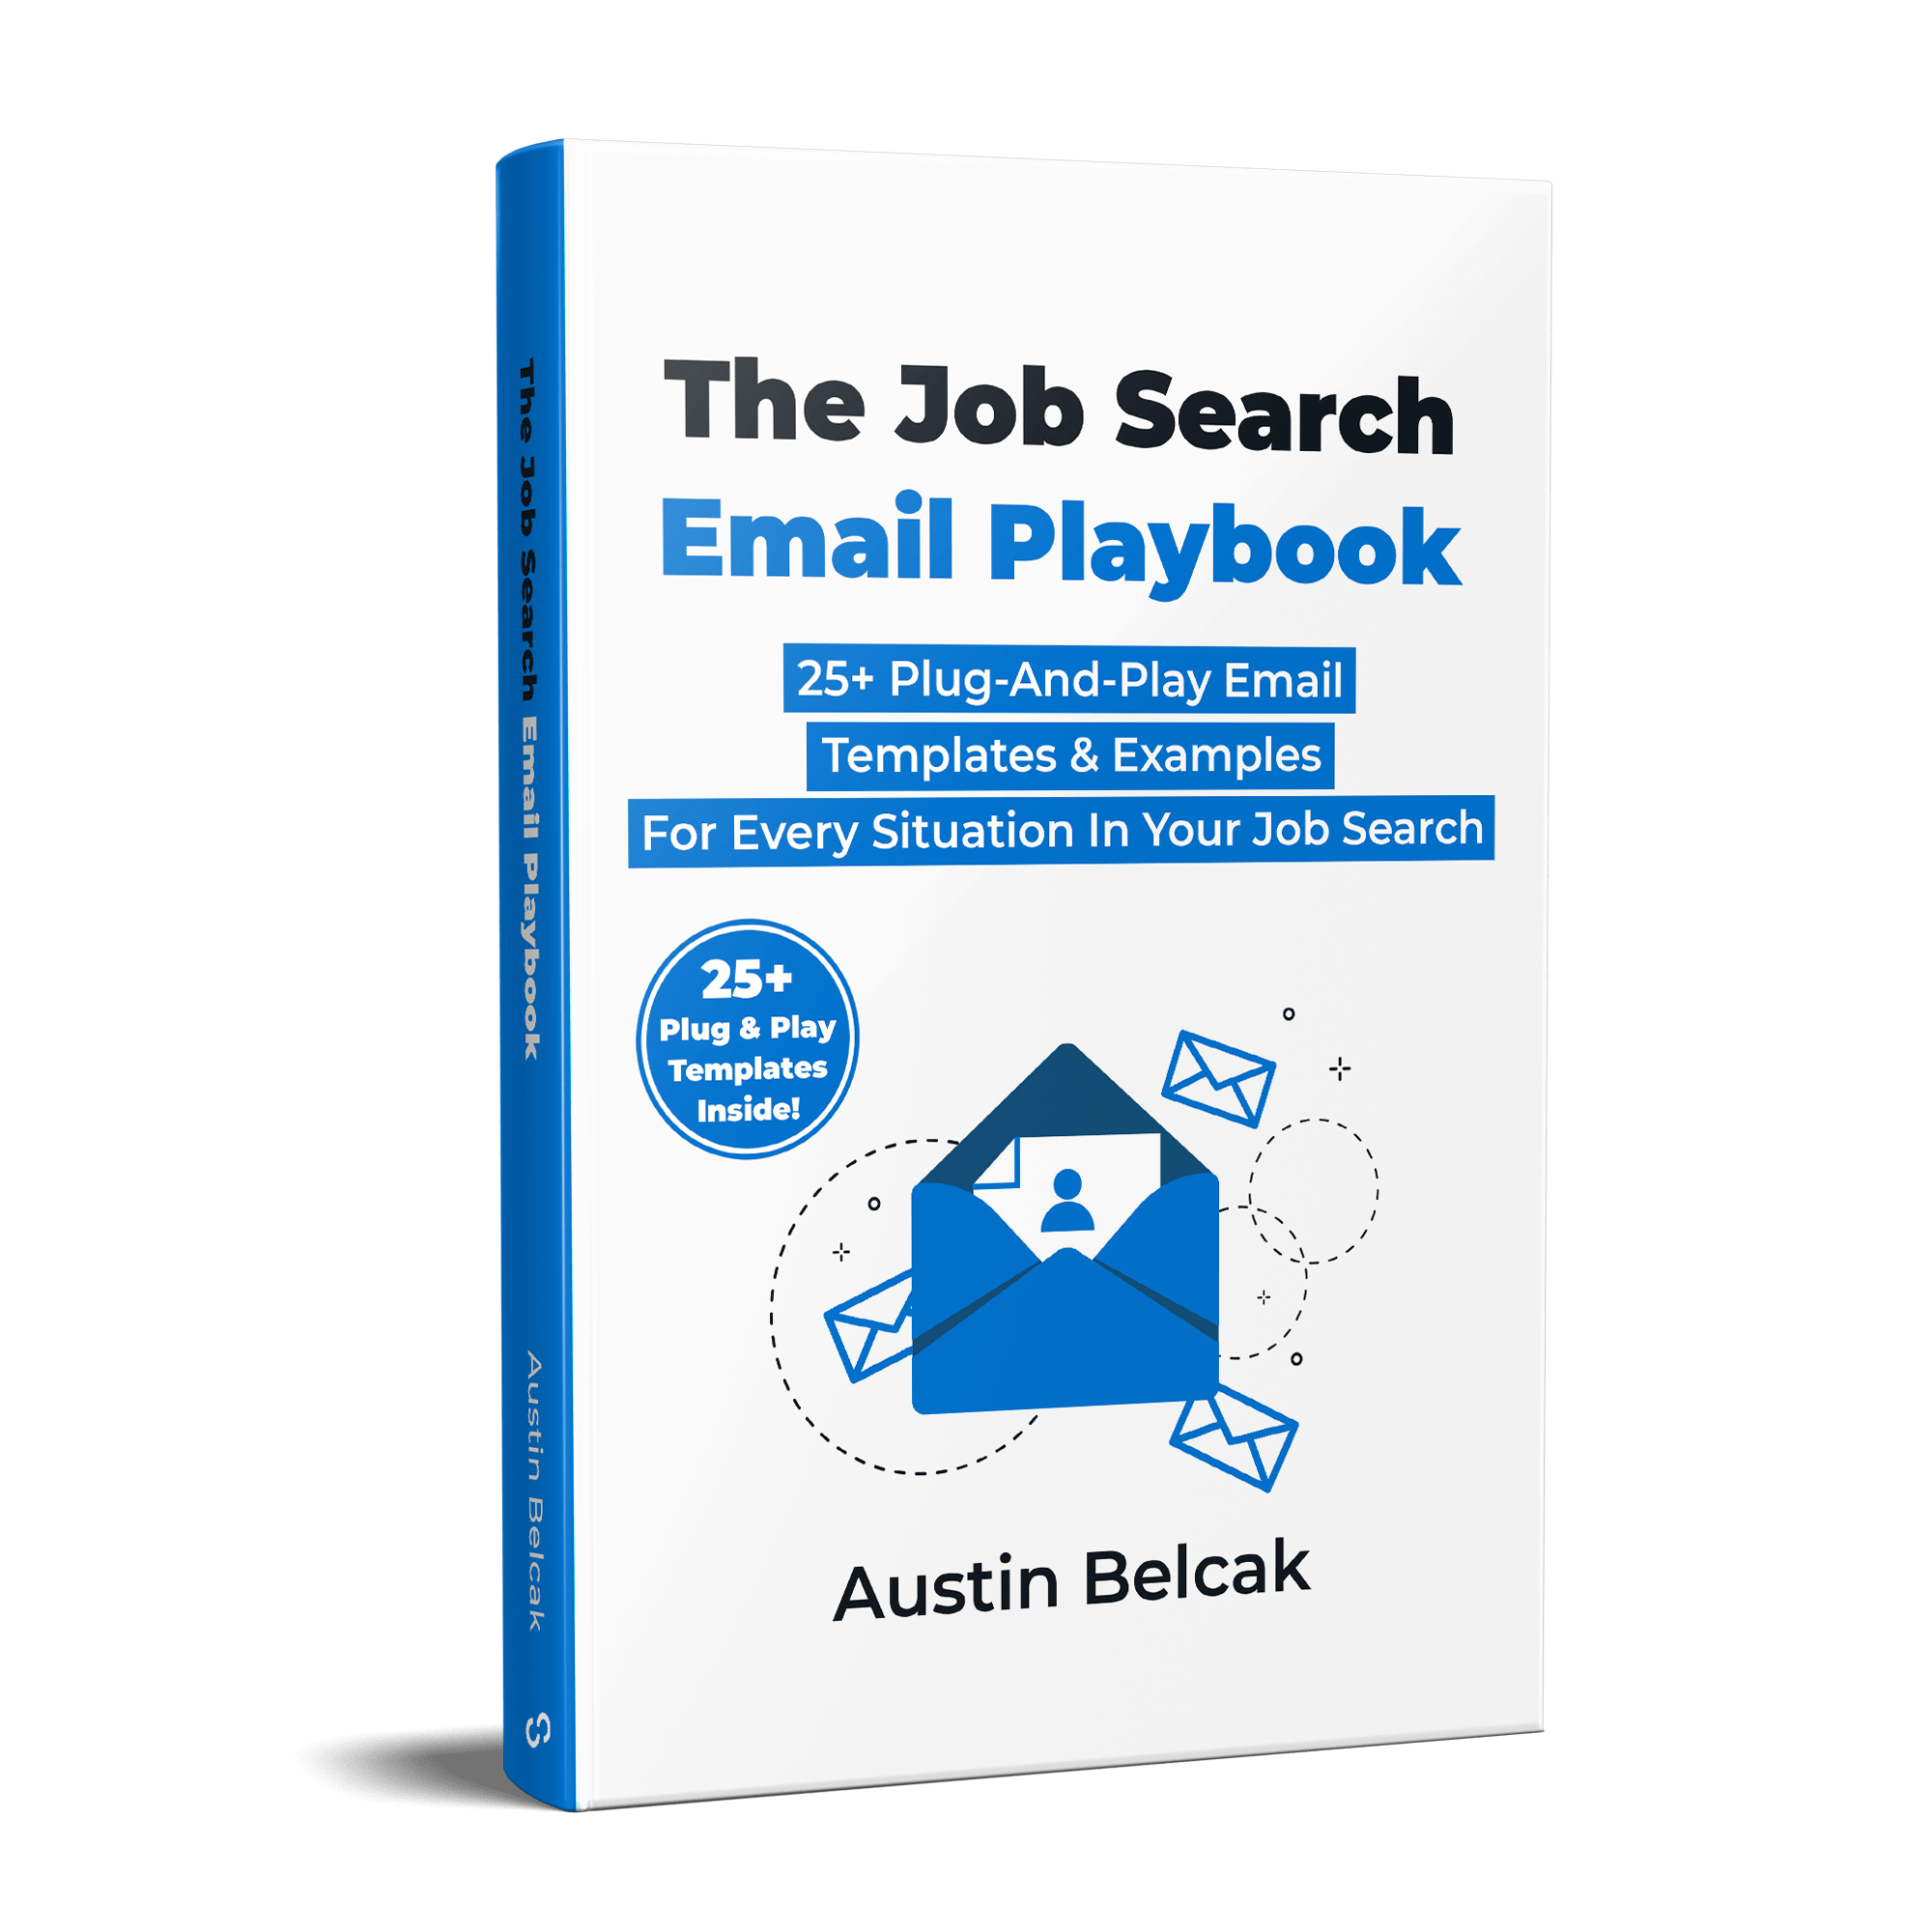 Job Search Email Playbook Product Image